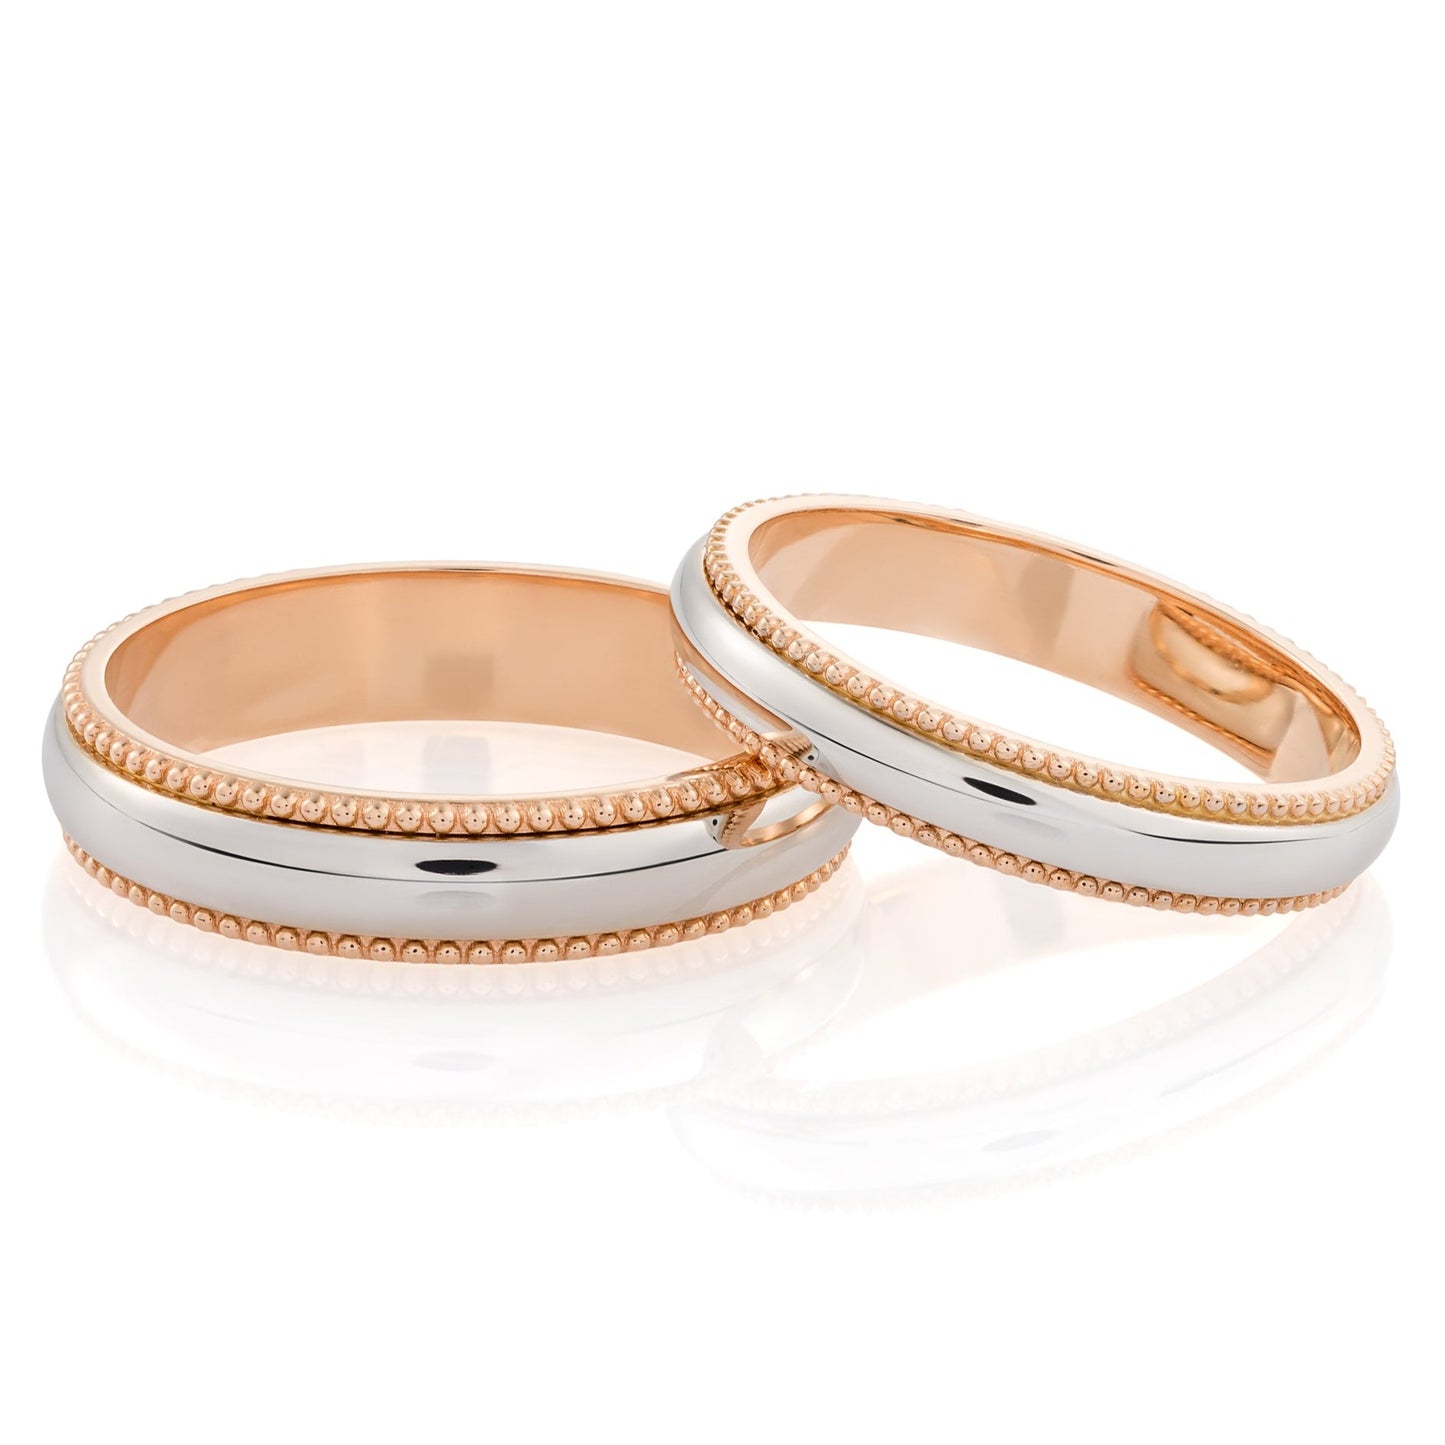 Two tone matching wedding bands with milgrain details. His and hers wedding rings set. Couple rings. Wedding bands set. Matching Rings. Gold wedding rings. Gold wedding bands